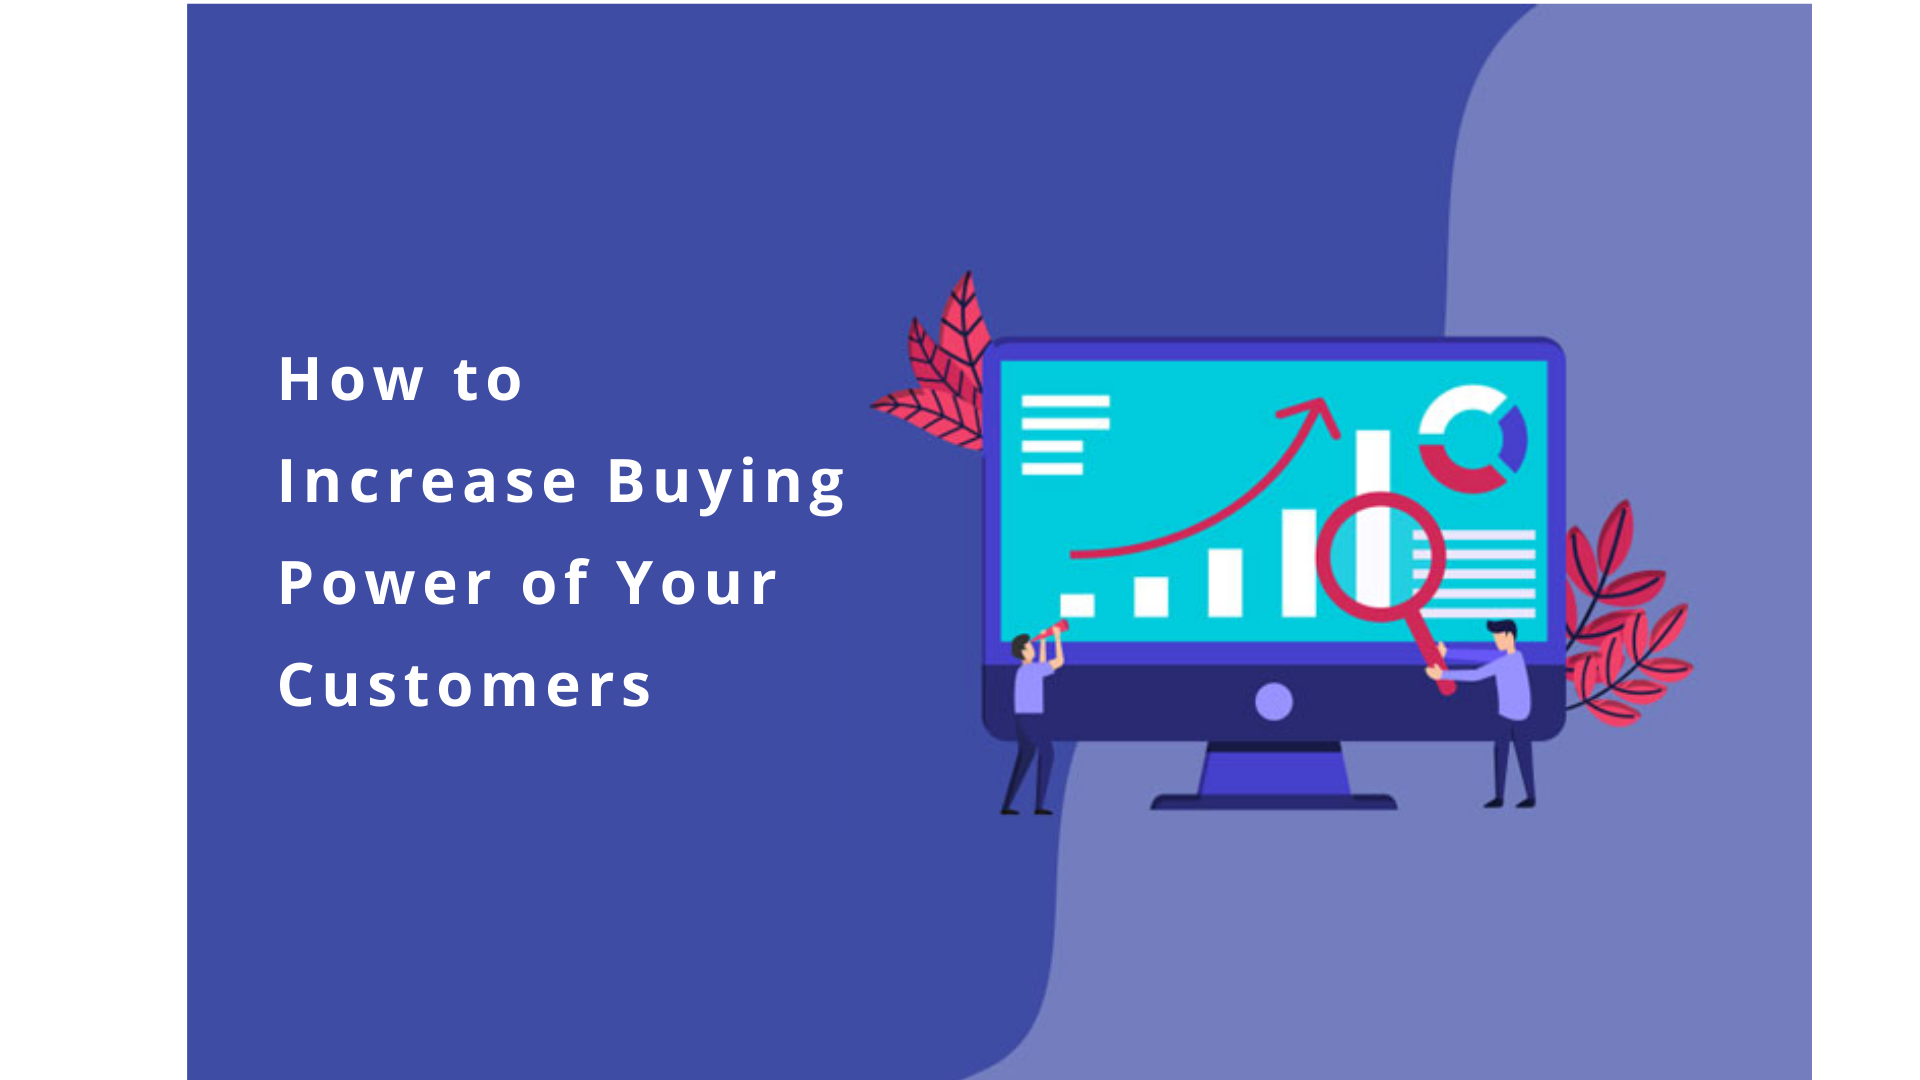 How to Increase Buying Power of Your Customers